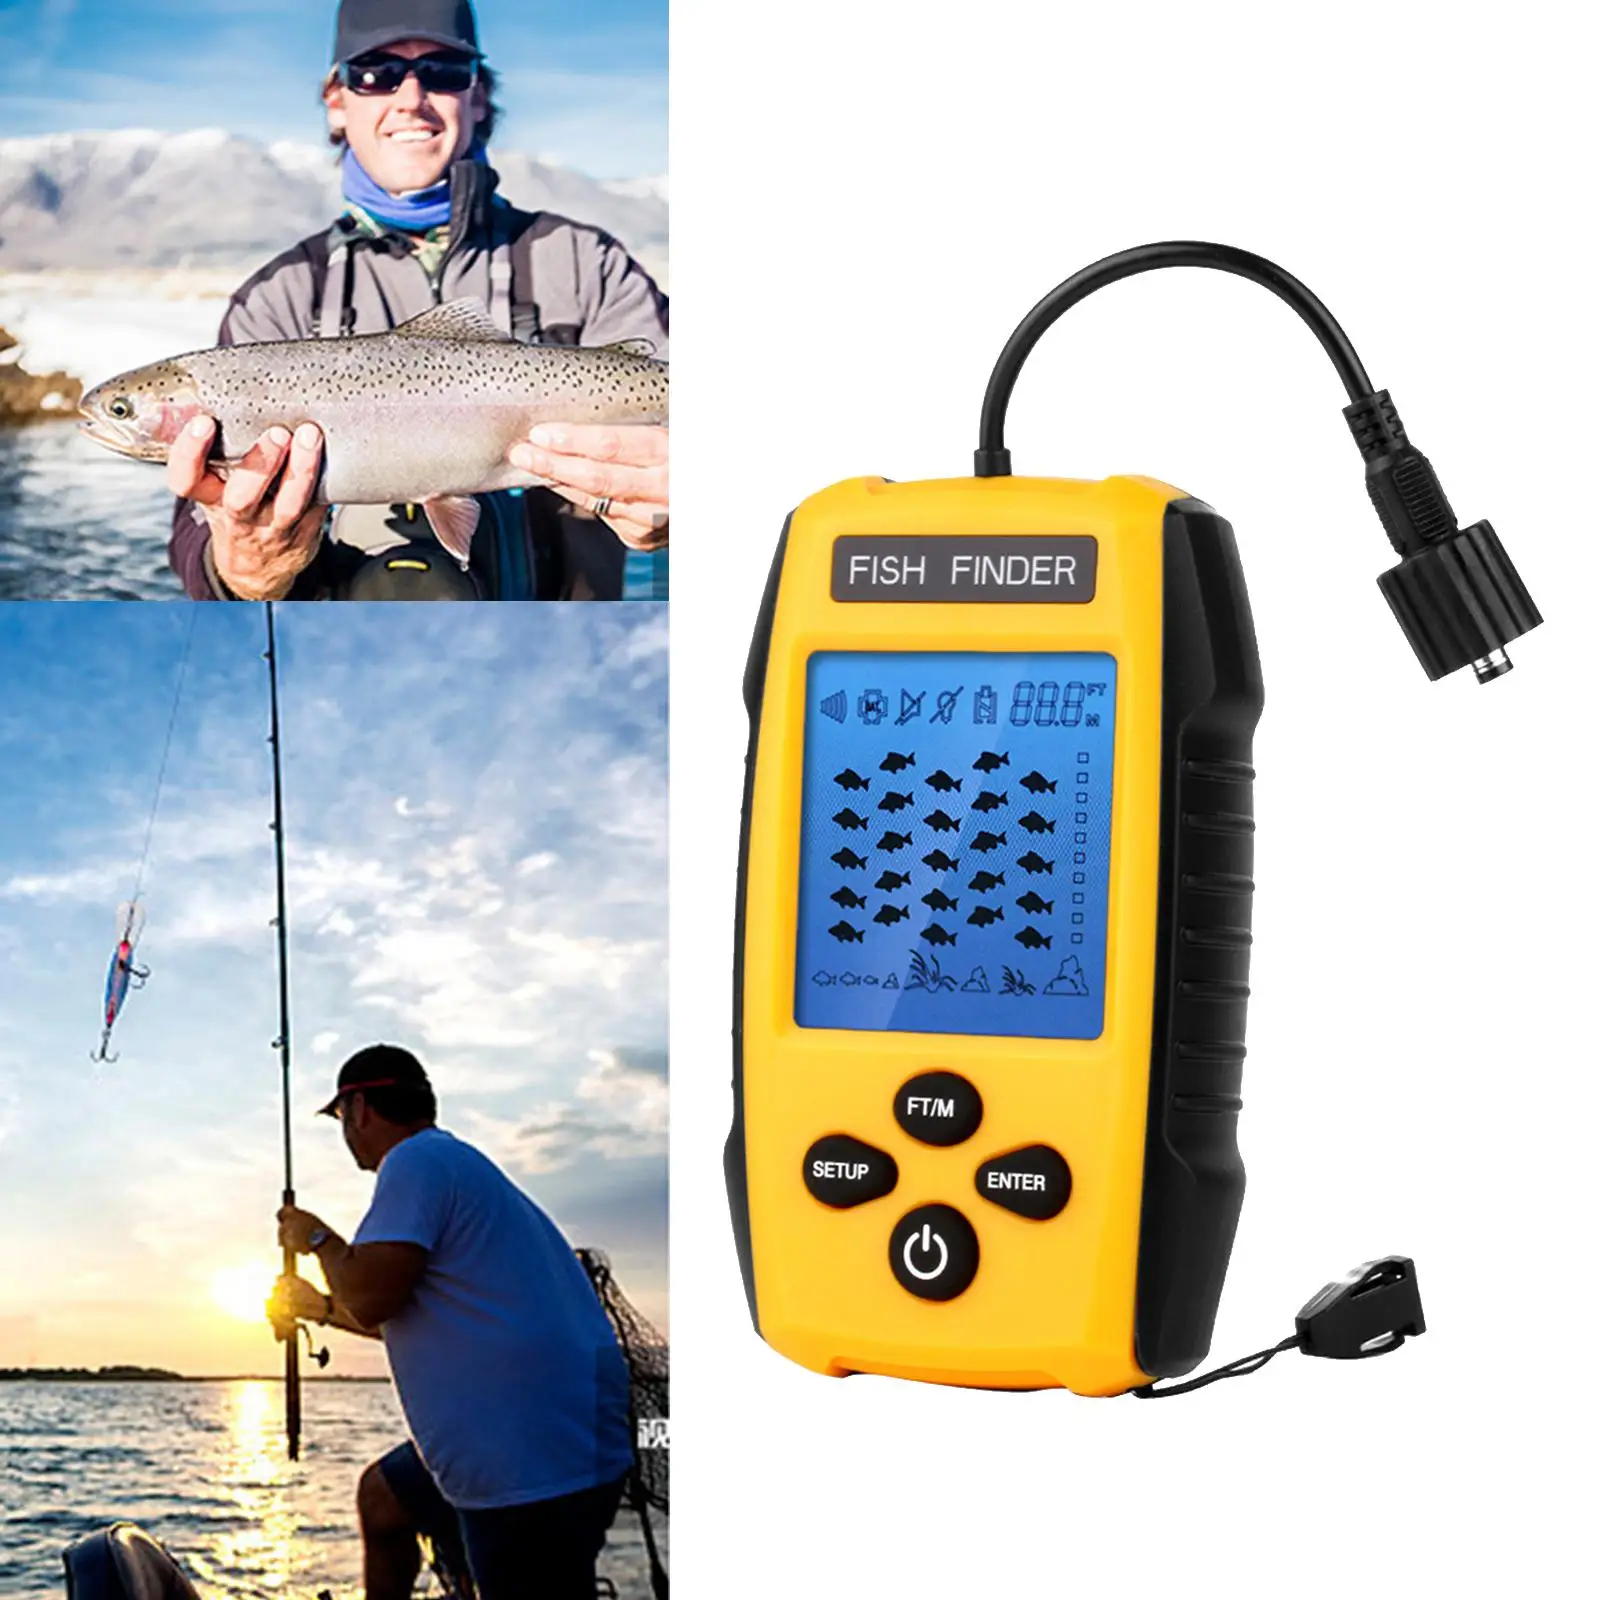 Portable Fish Finder Handheld Fishfinder Fishing Gear with Sonar Transducer, LCD Display (Yellow)